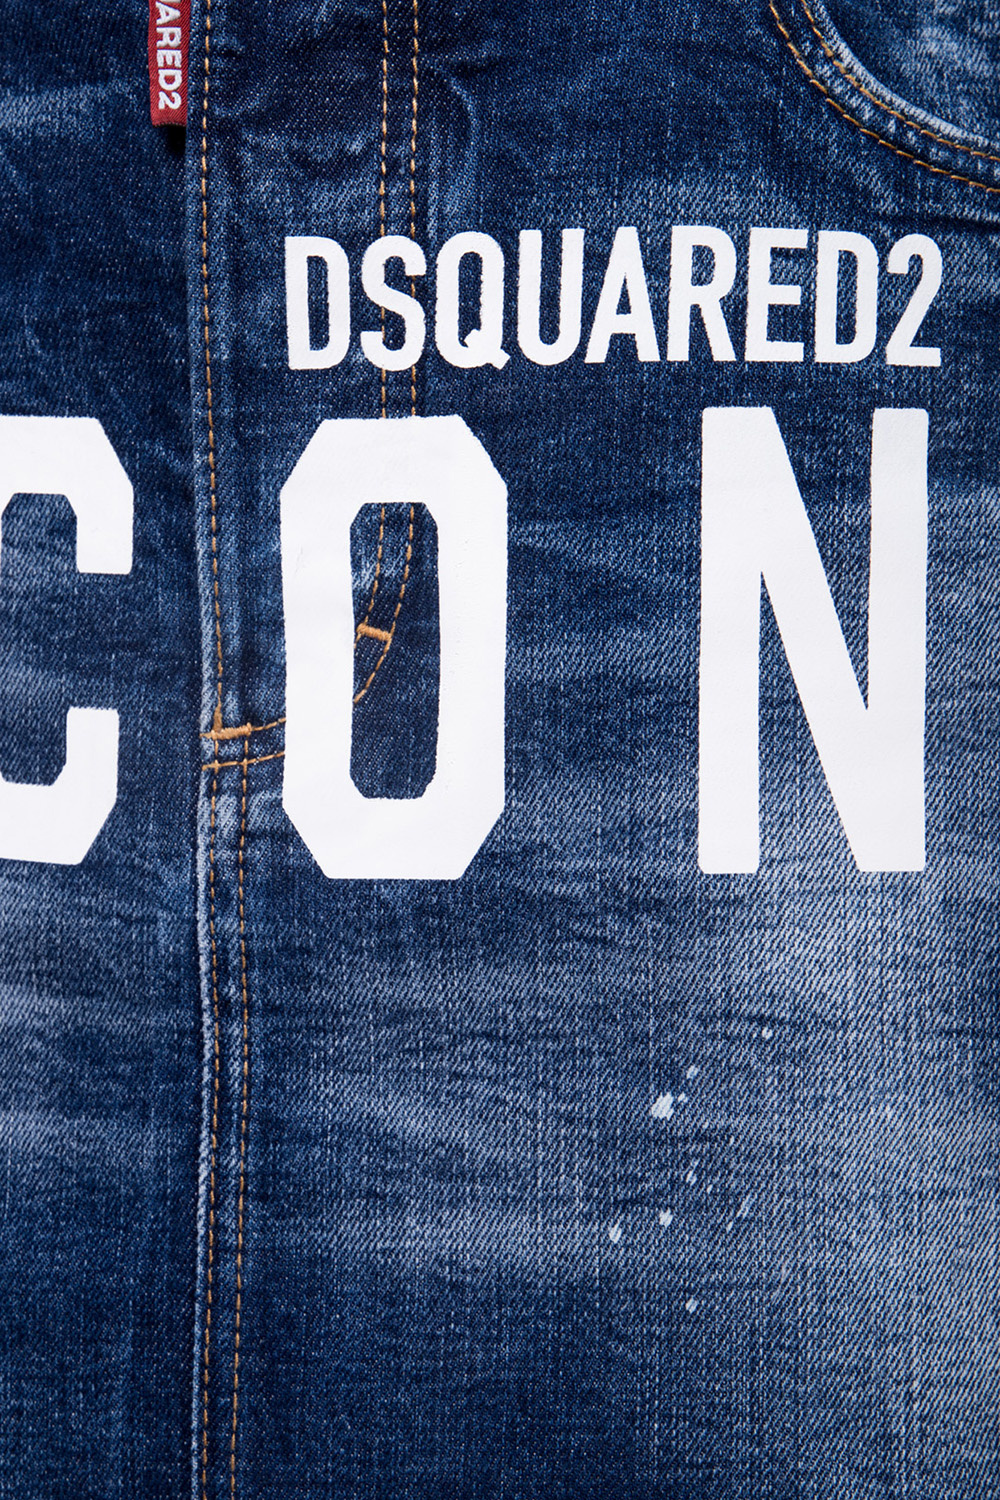 Dsquared2 Lets keep in touch